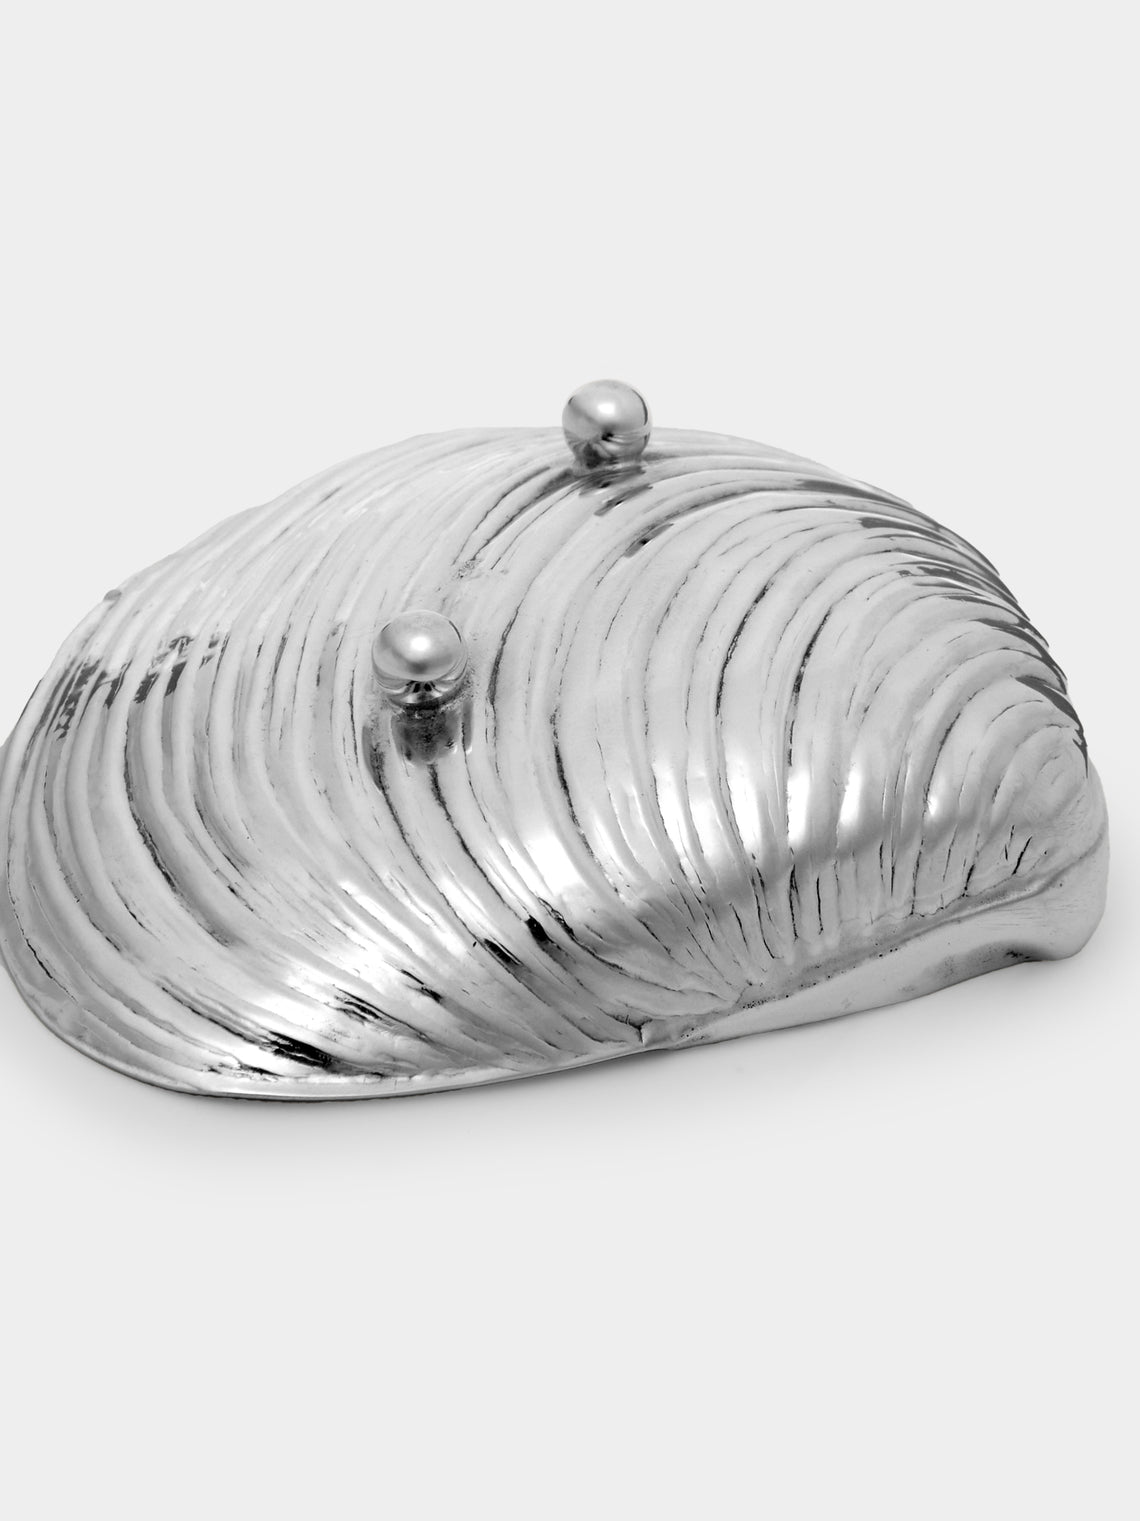 Antique and Vintage - 1940s Solid Silver Shell Salt Dish -  - ABASK